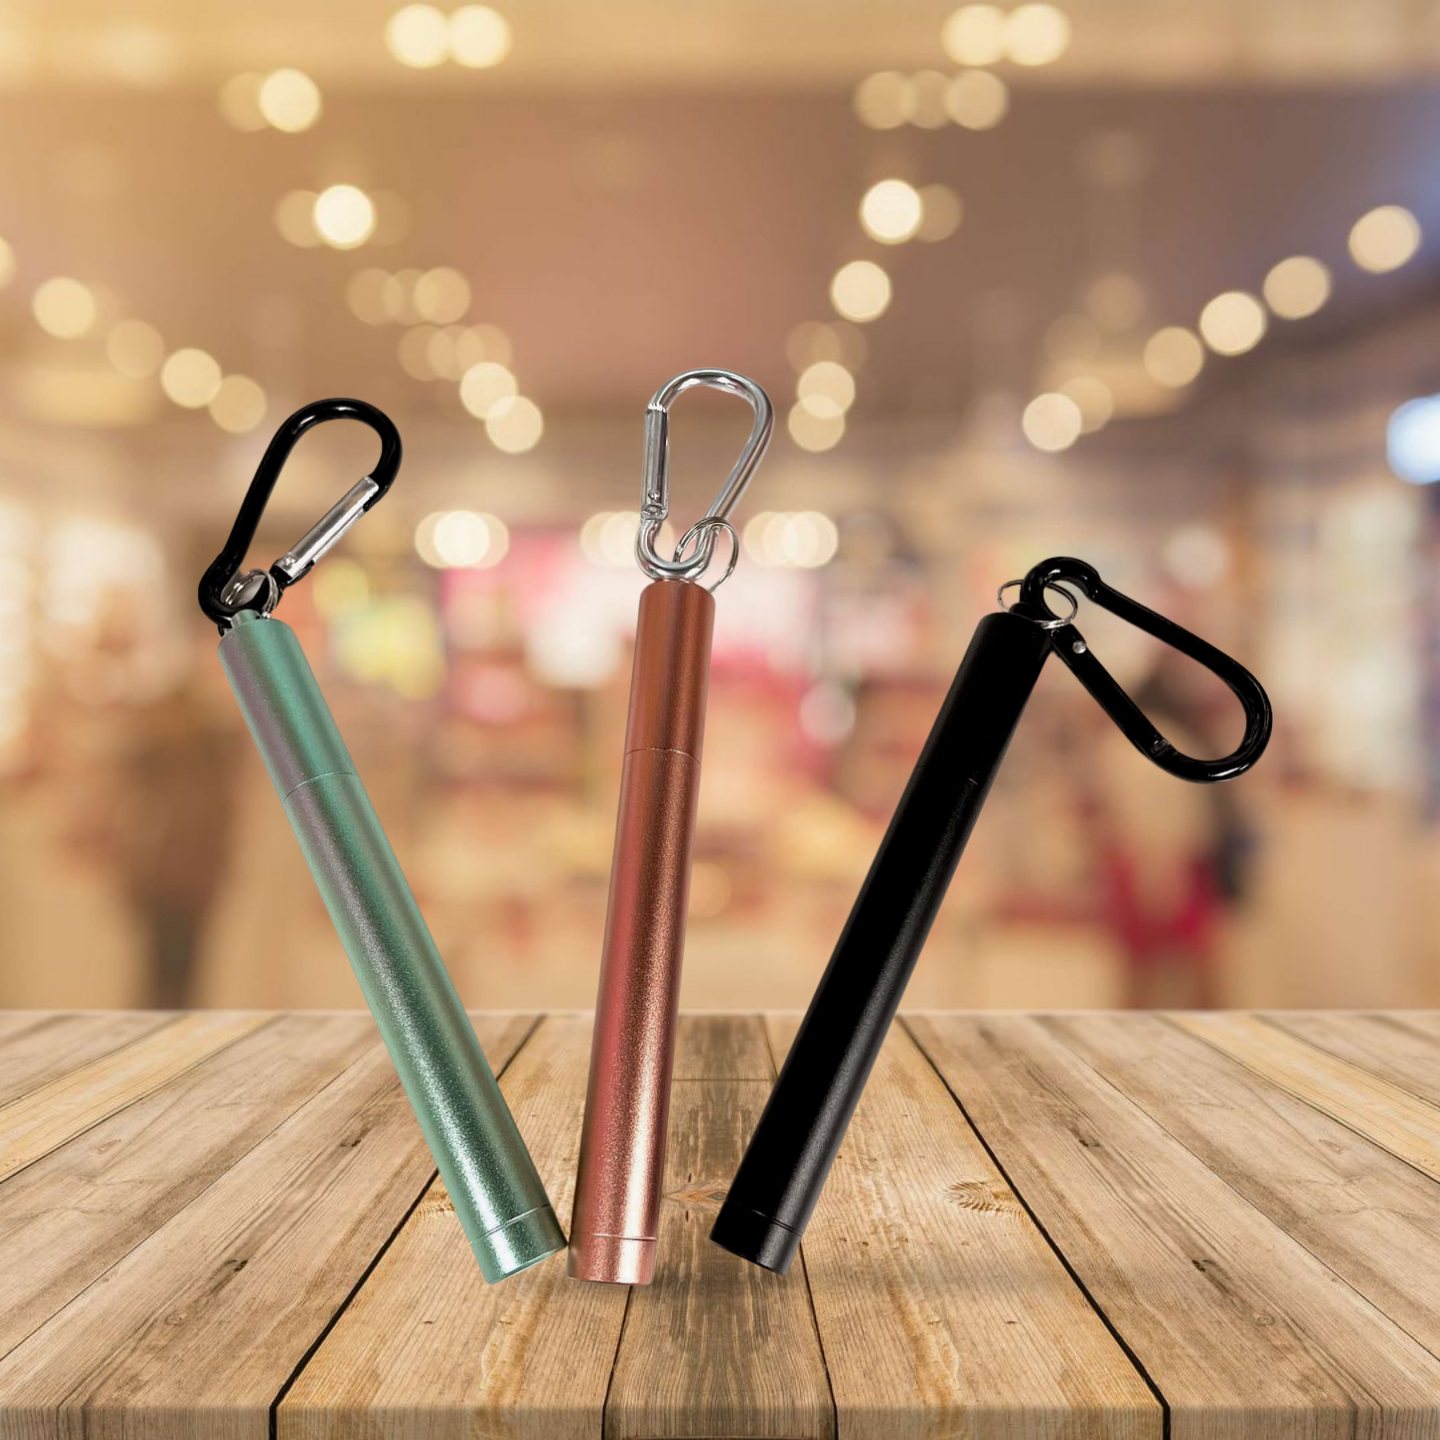 Stainless steel Travel Straw